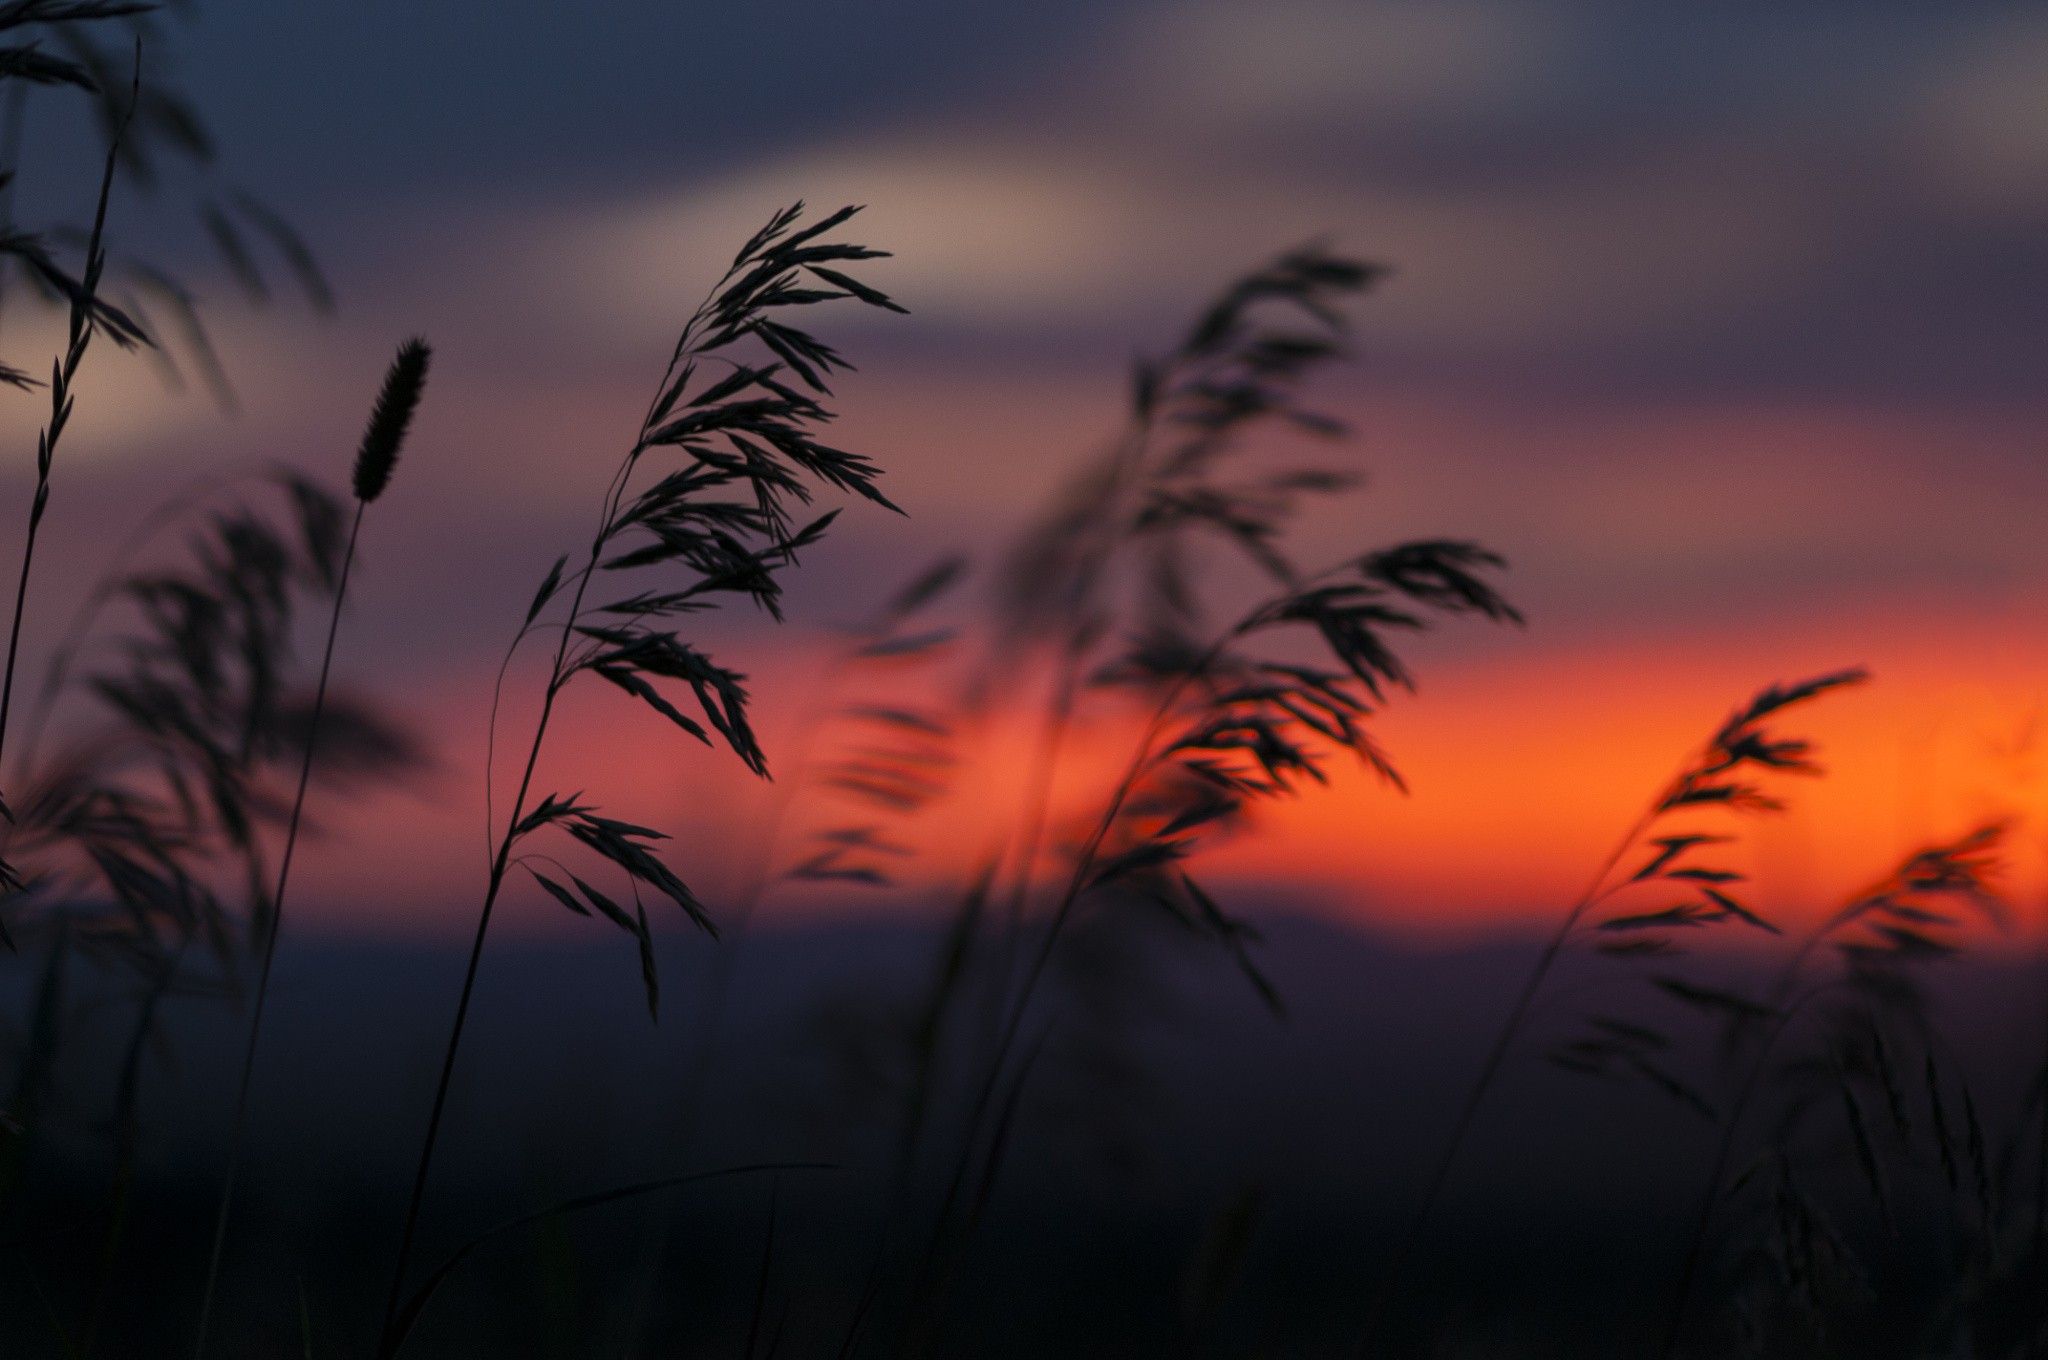 General 2048x1360 plants sunset silhouette reeds nature